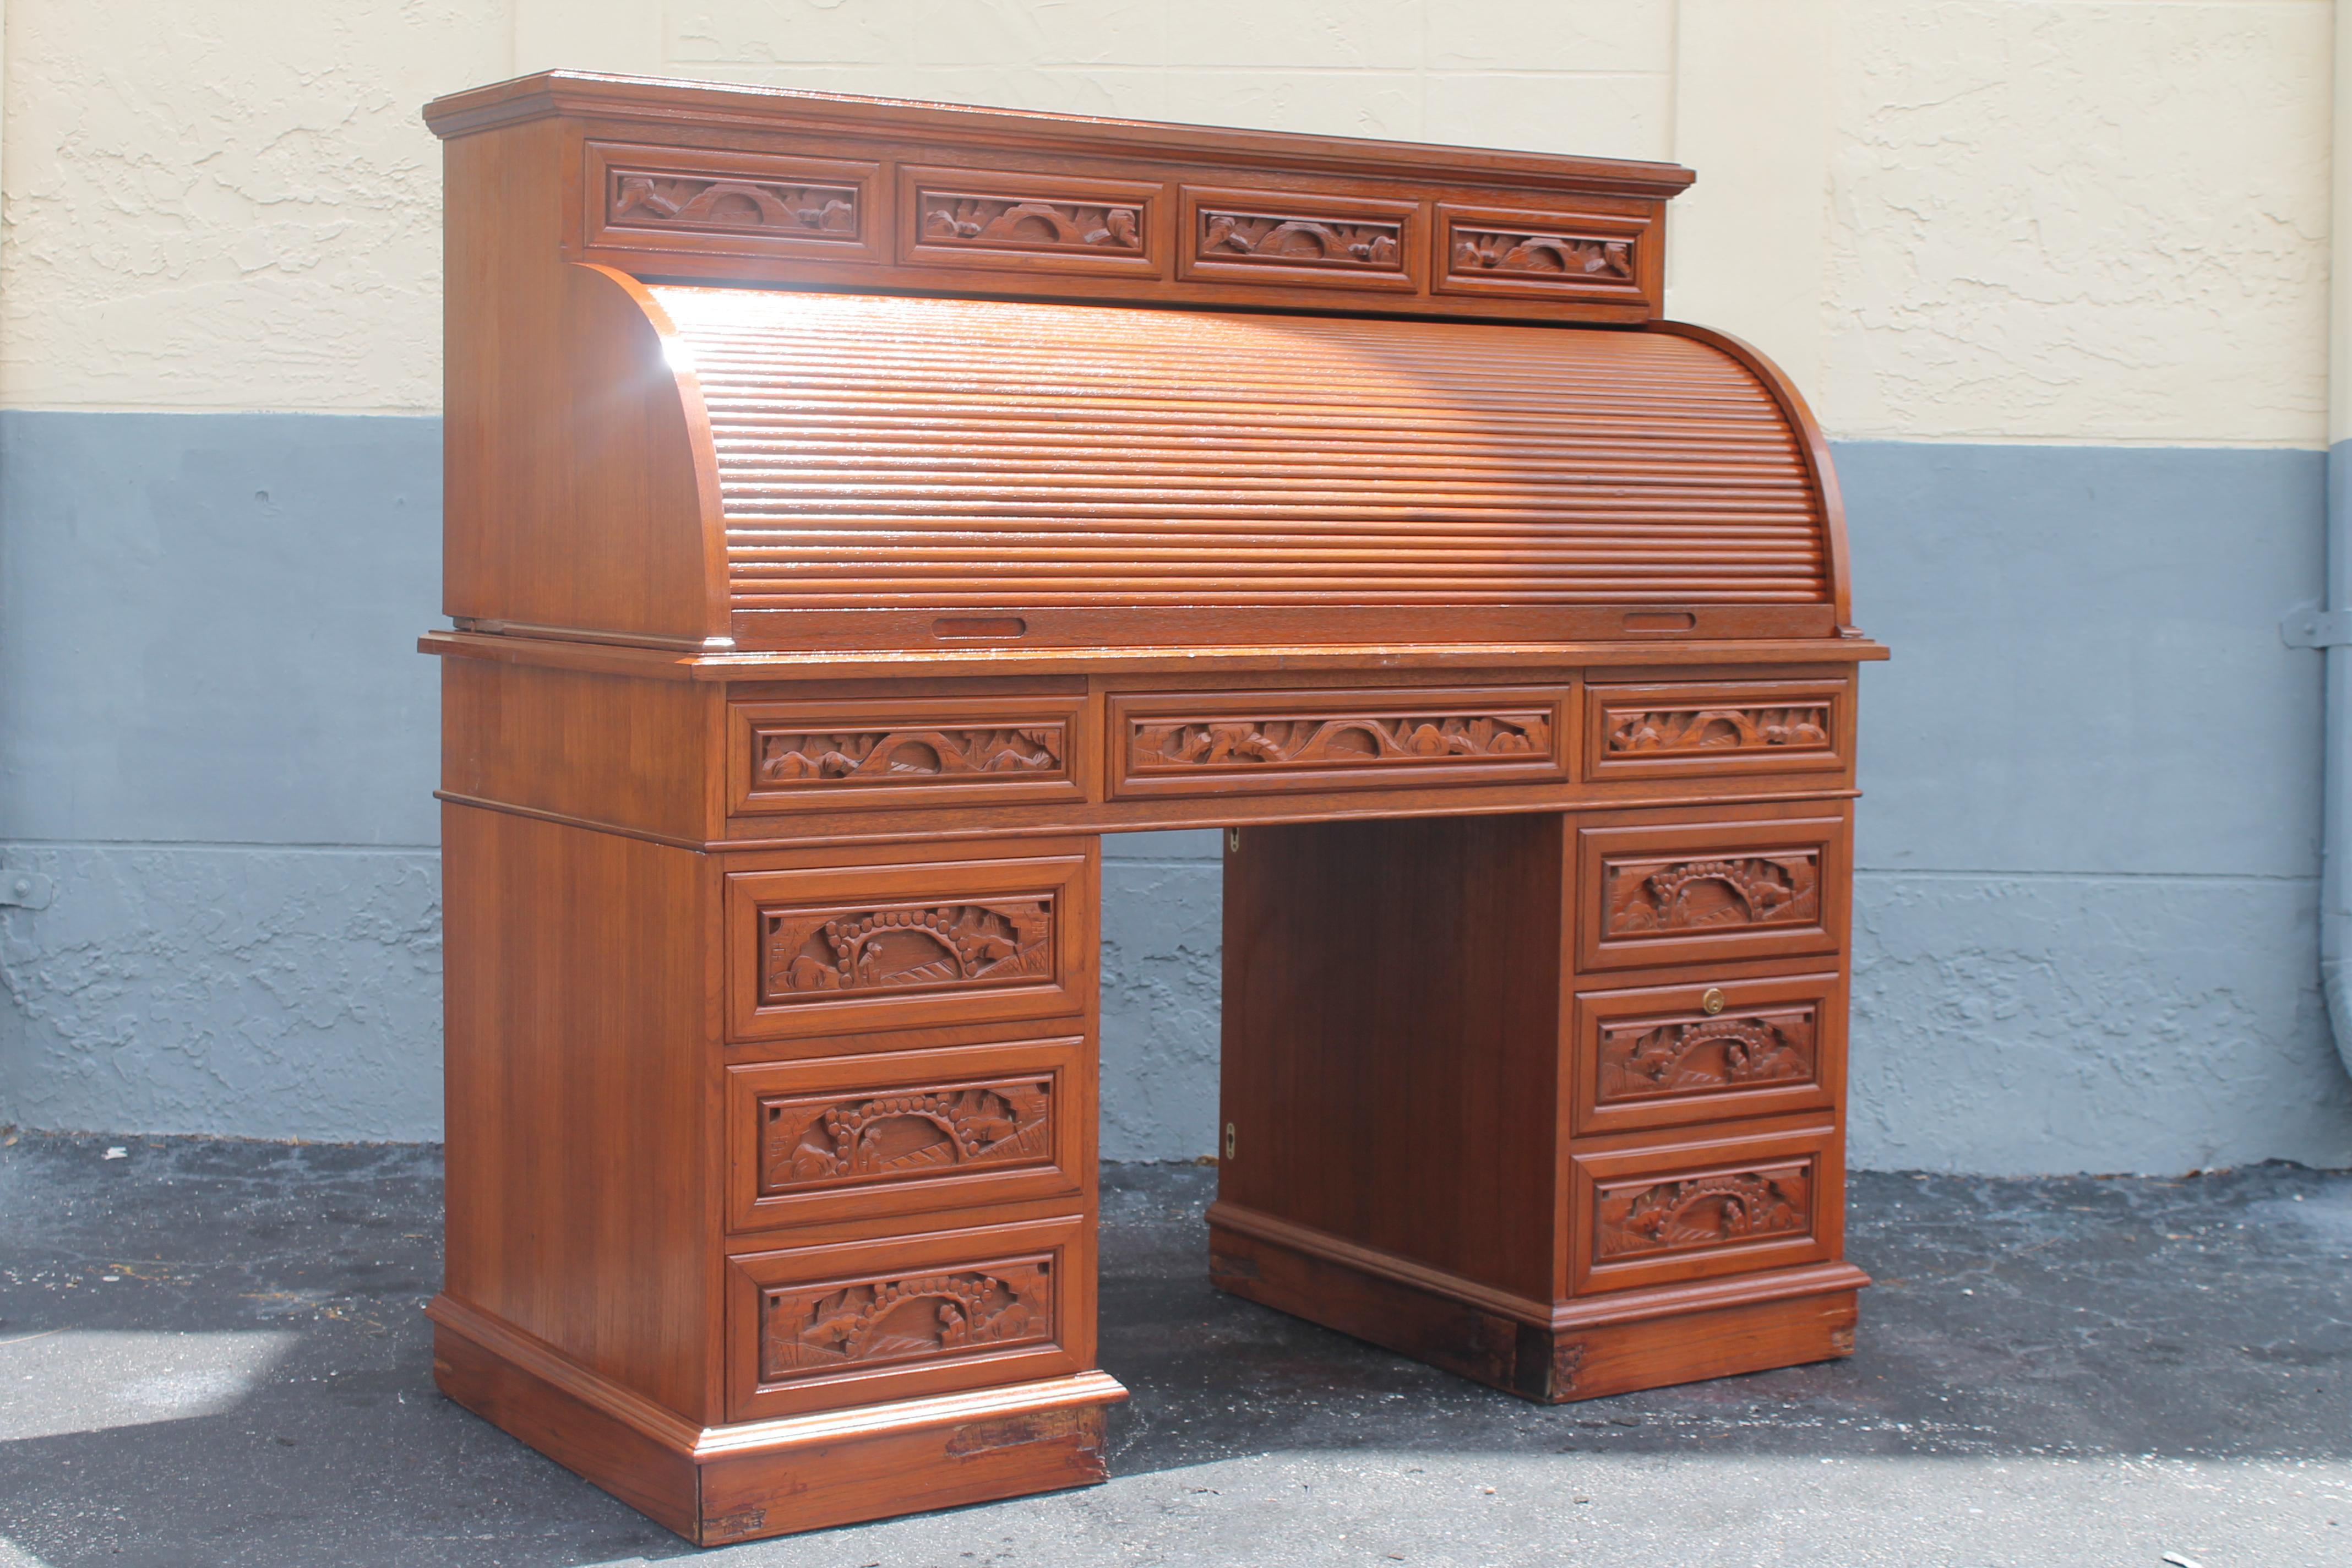 Beautiful Vintage Mid Century 1970's Grand Rolltop Writing Desk with Asian Flair. Beautifully carved. will convert to a standard writing desk by taking off the top rolltop portion. Stunning piece with all kinds of storage.